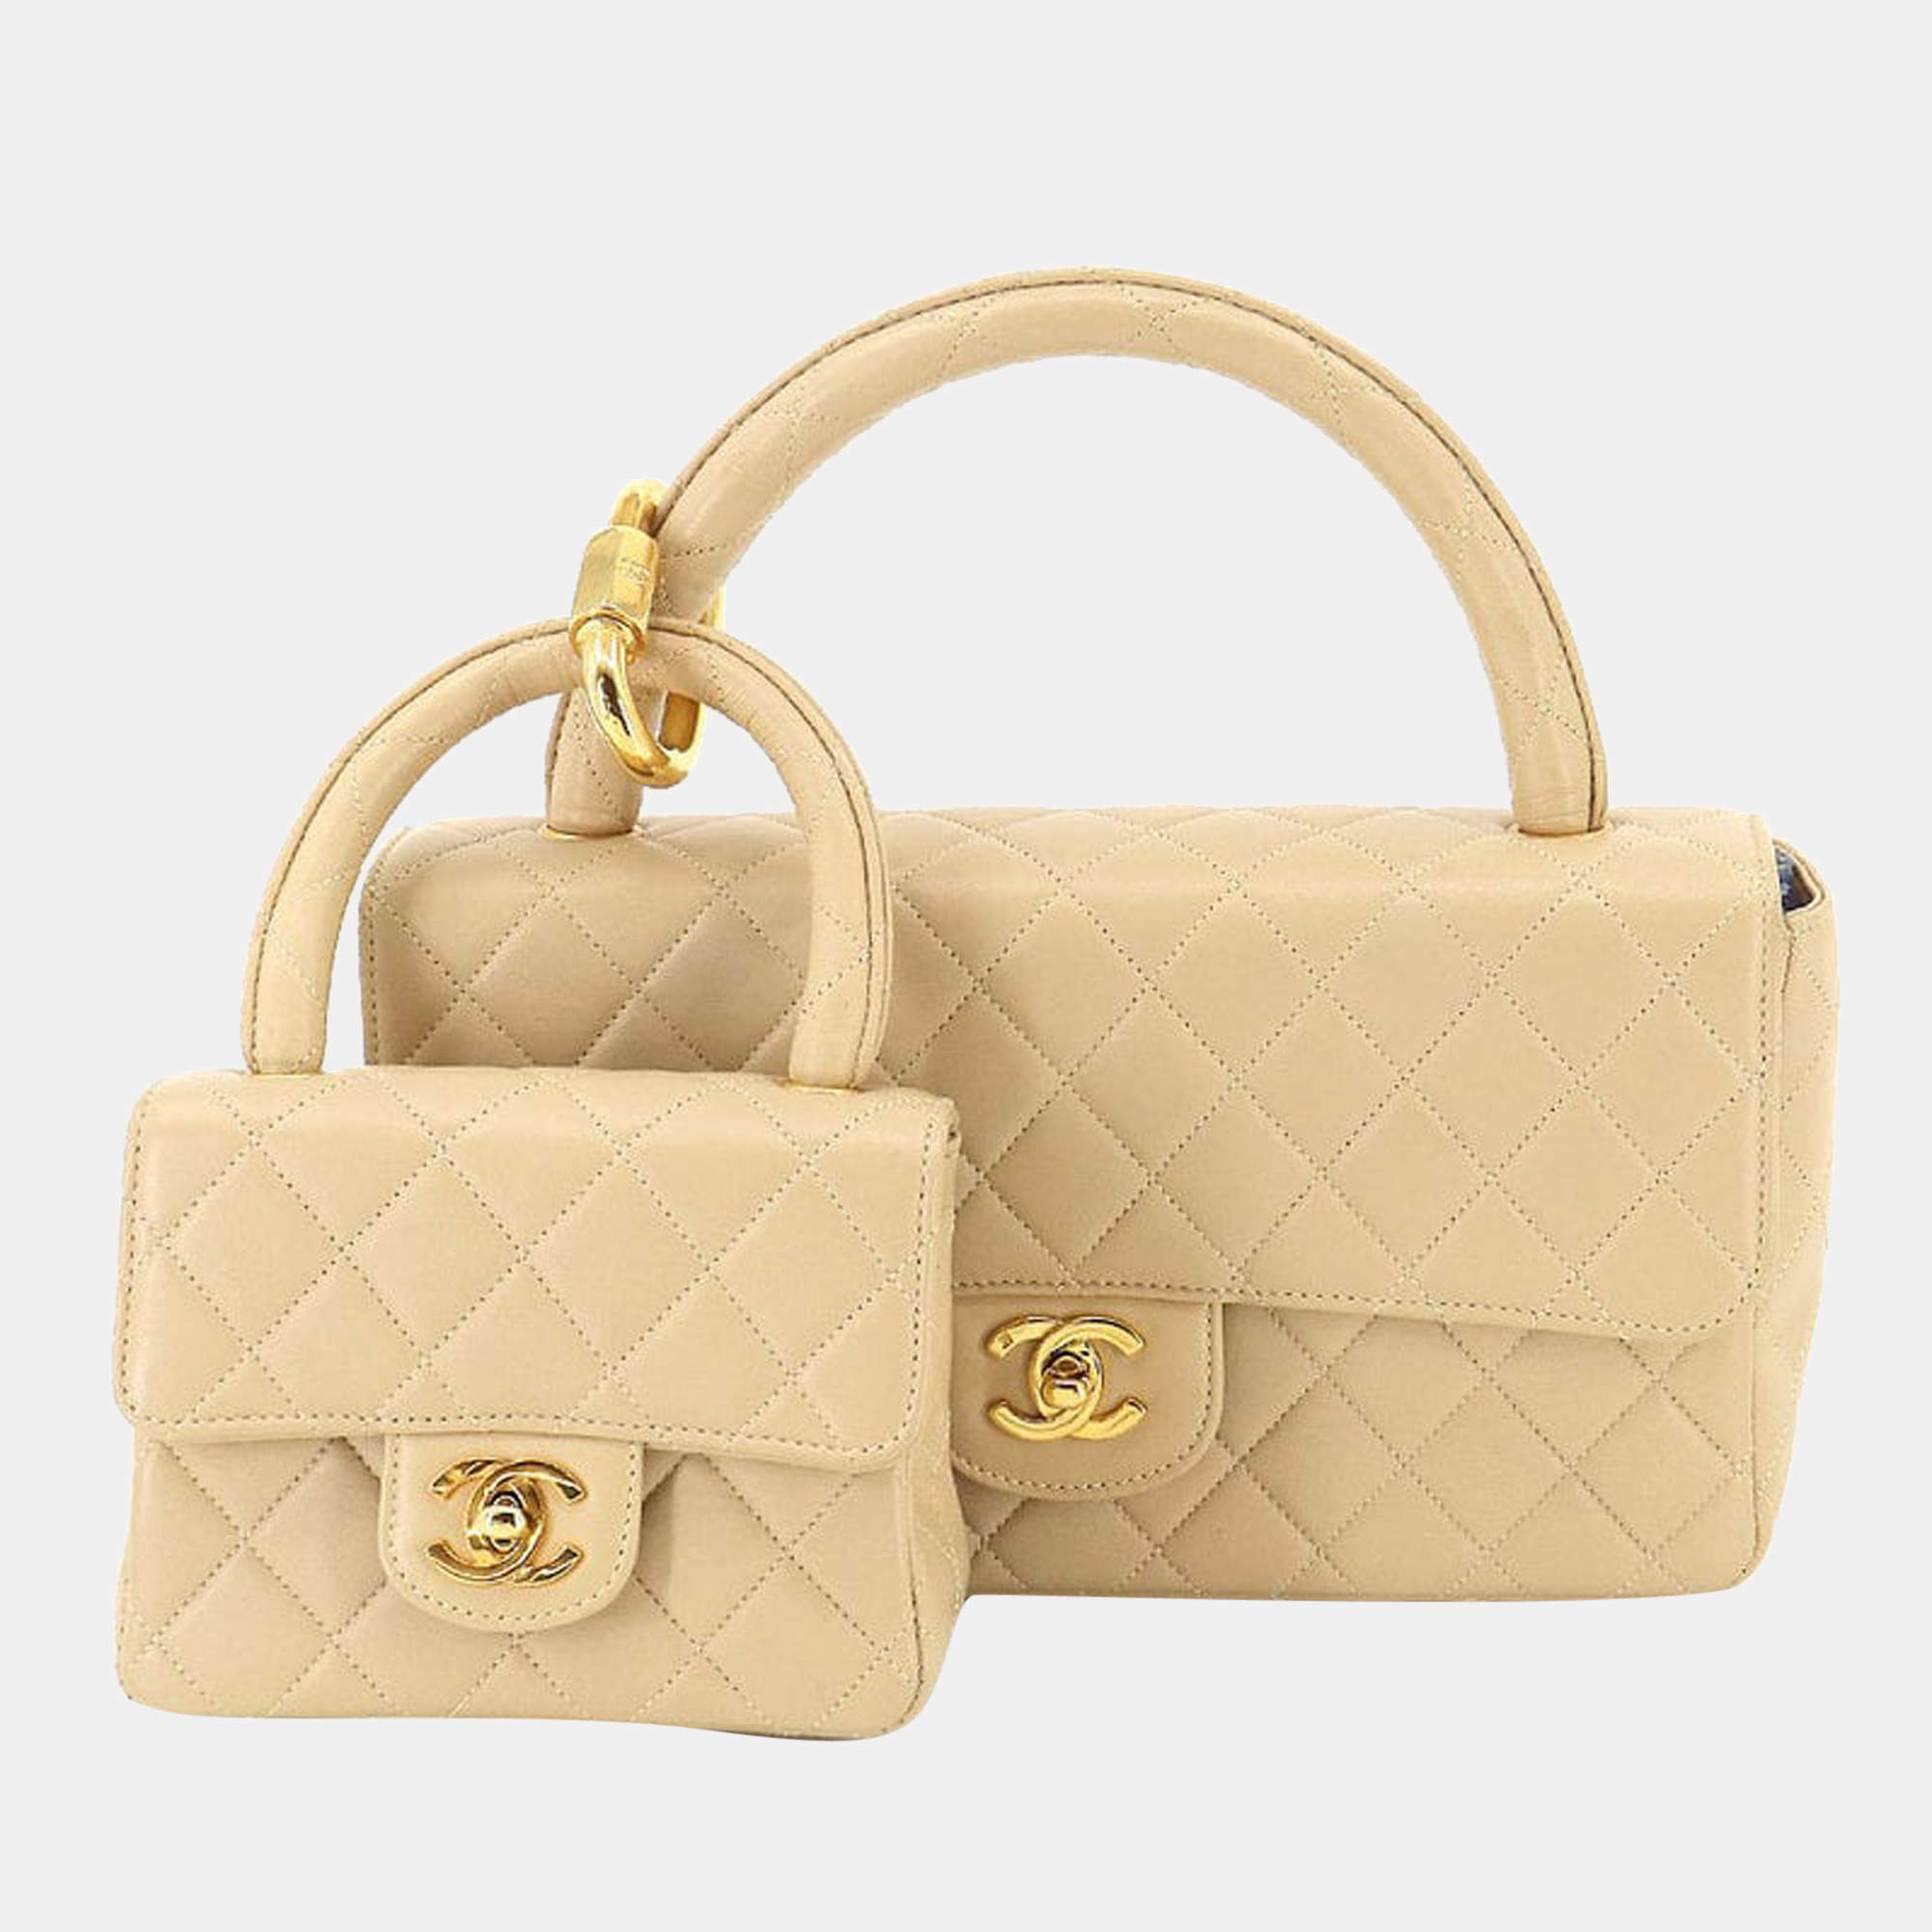 Reserved for tl. Vintage CHANEL beige caviar leather kelly handbag wit –  eNdApPi ***where you can find your favorite designer  vintages..authentic, affordable, and lovable.